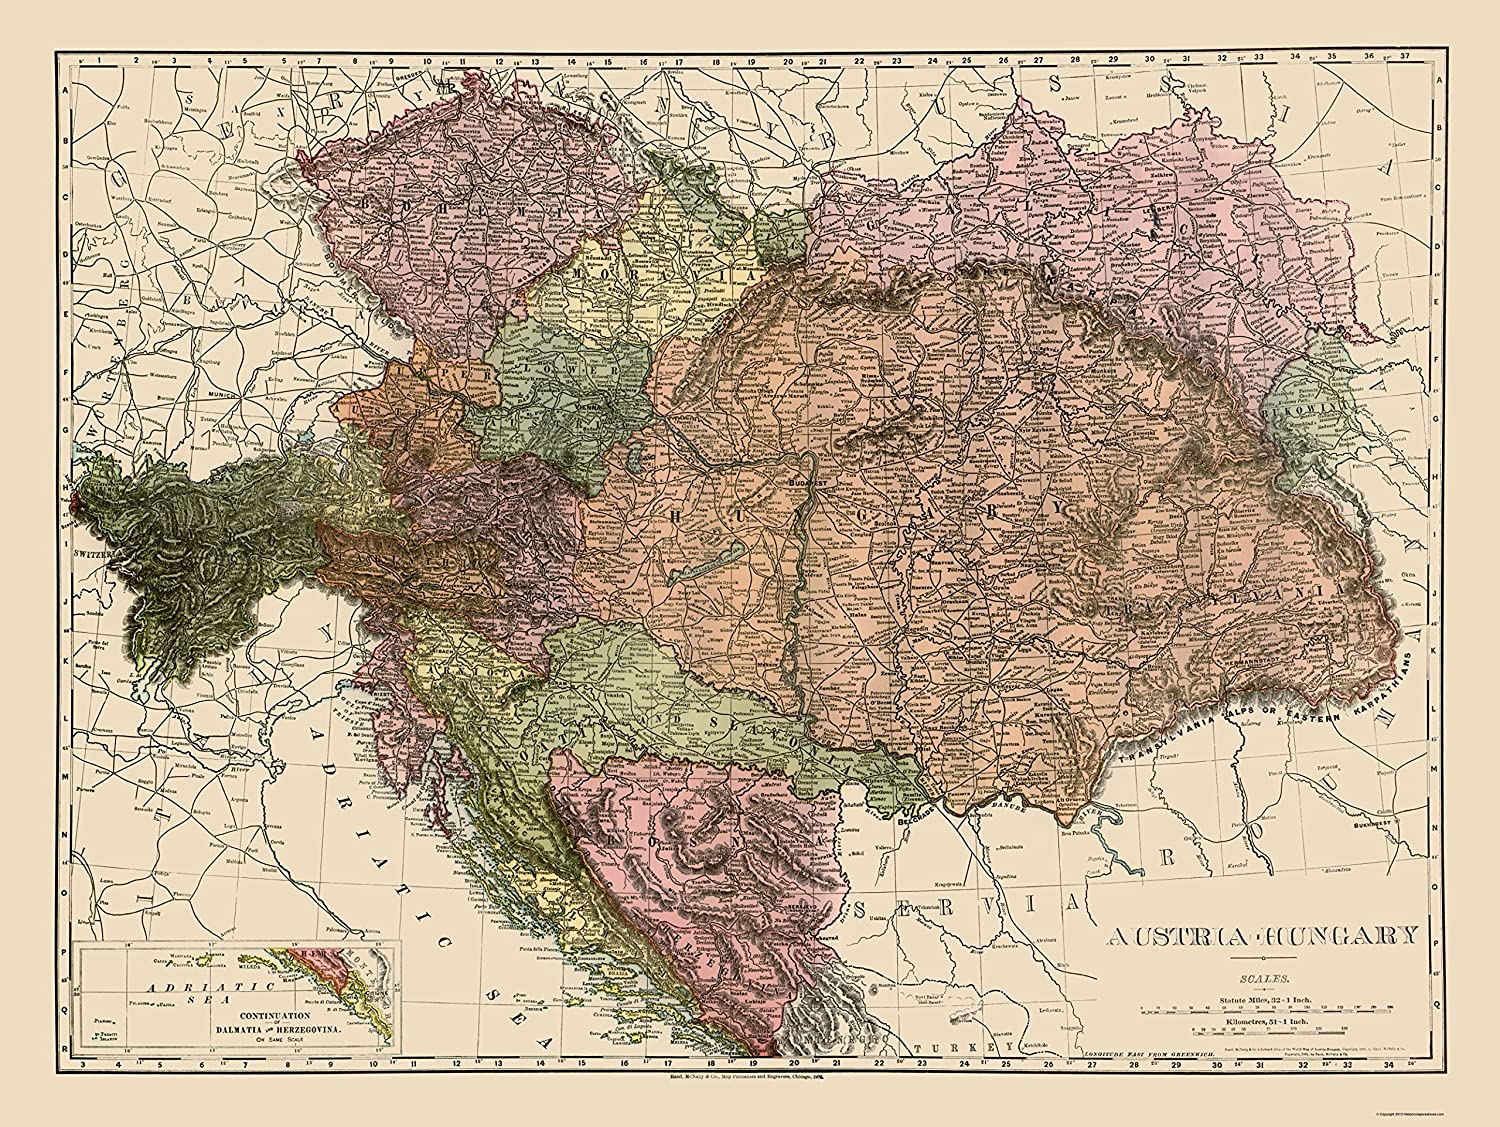 MAPS OF THE PAST Austria Hungary McNally 1895 23.00 X 30.61 Art Paper: Posters & Prints